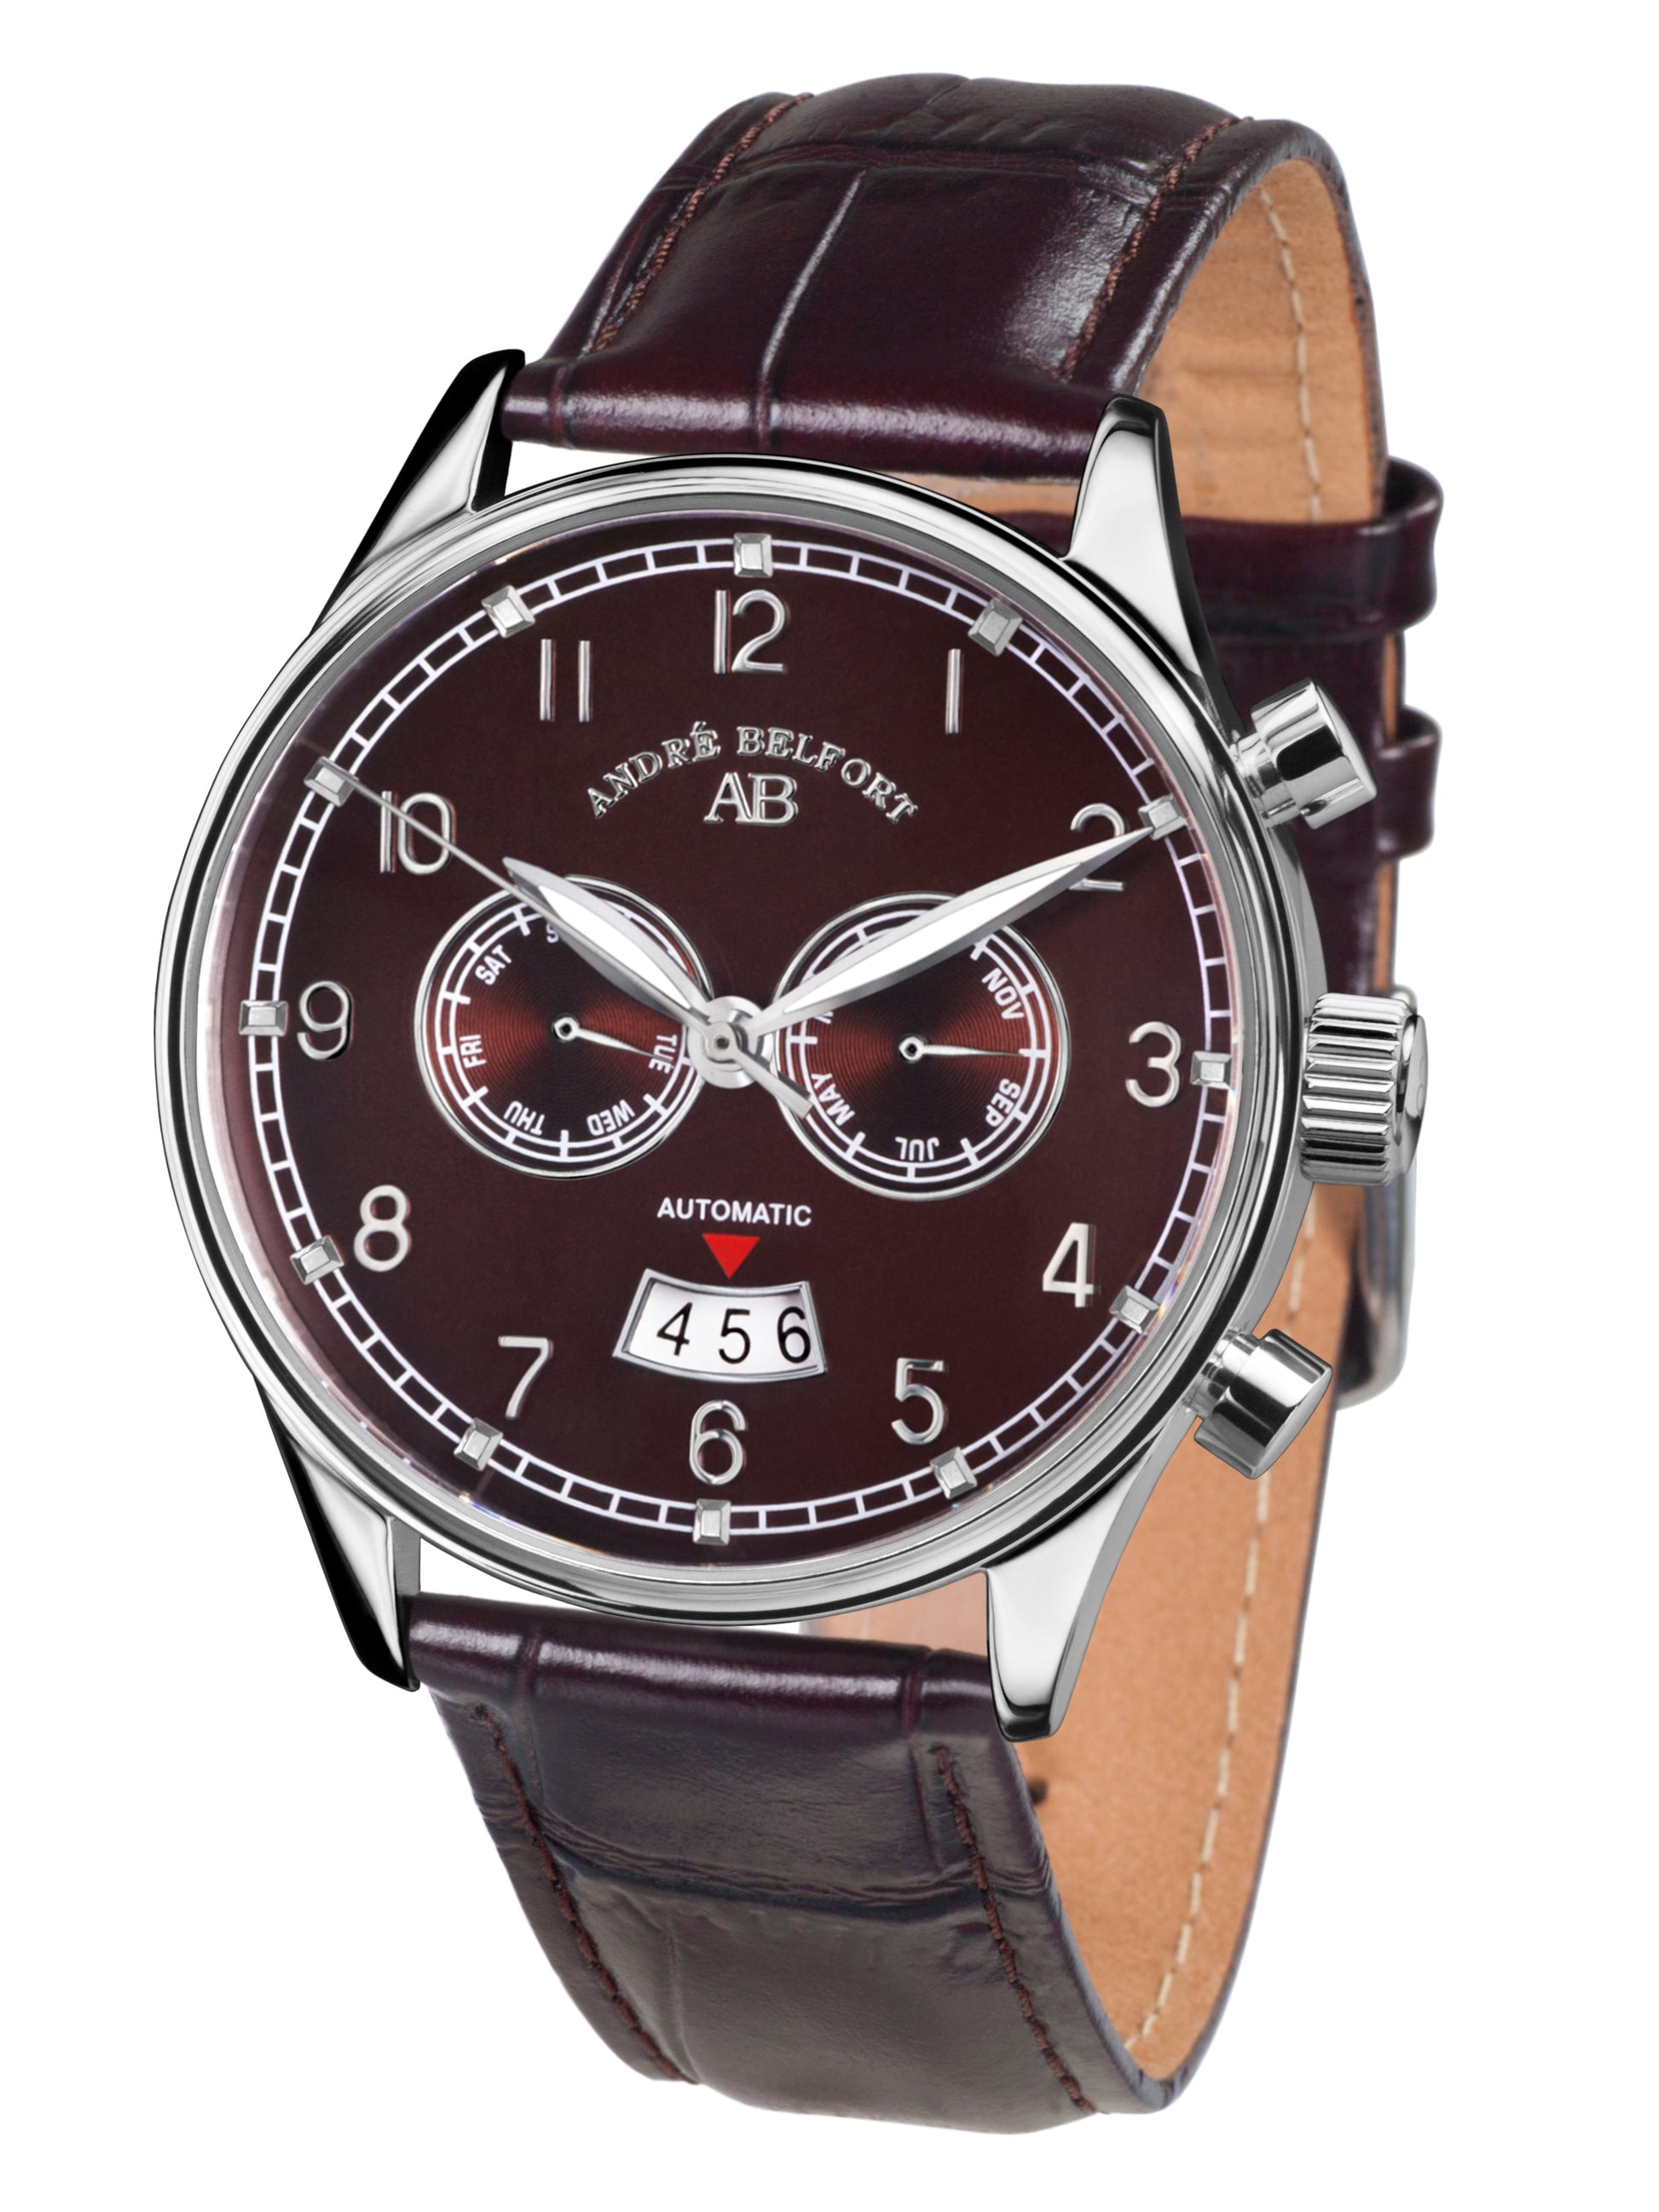 Automatic watches — Calendrier — André Belfort — steel brown